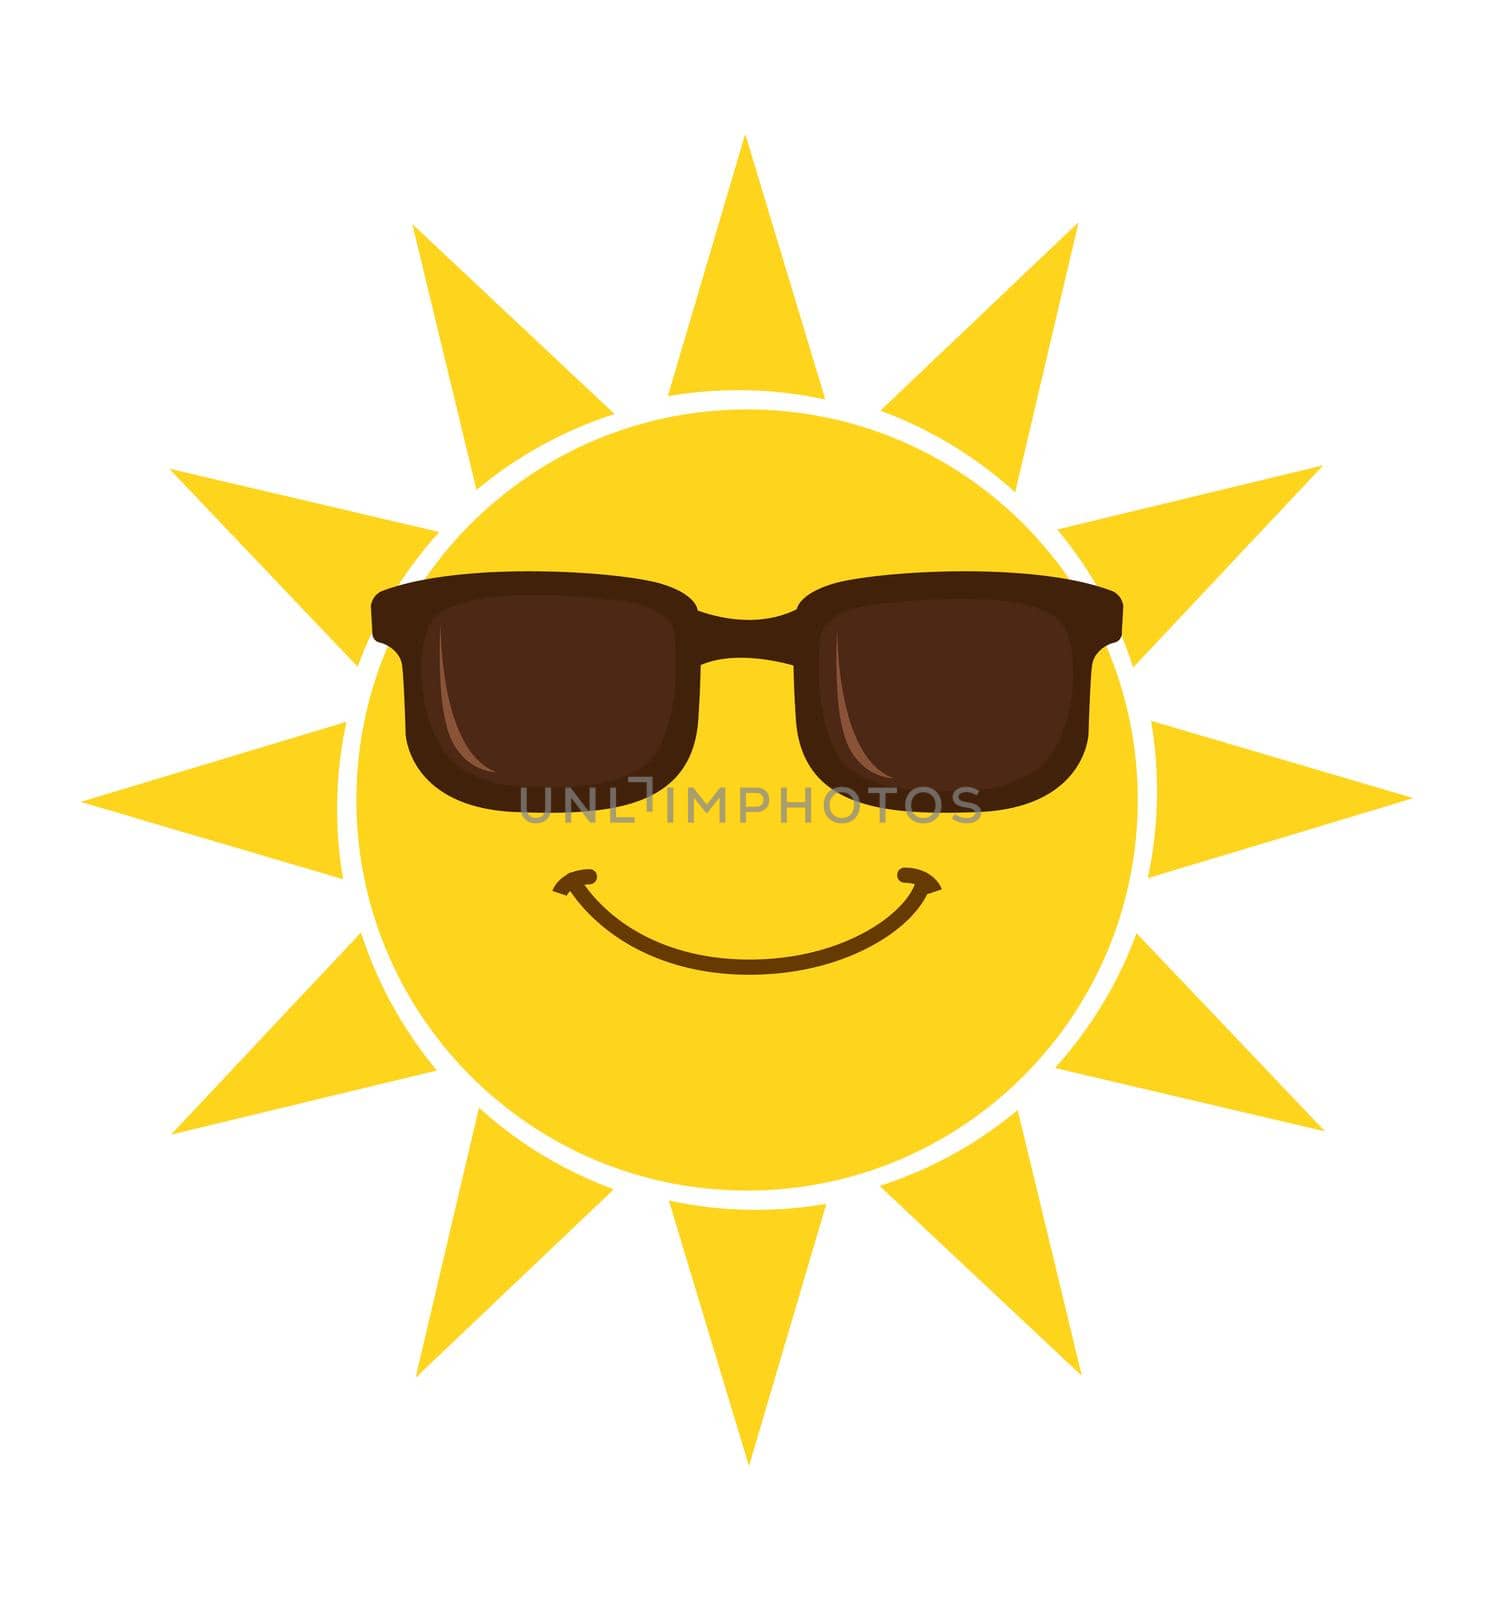 Summer sun smiling face with sunglasses vector illustration isolated on white background eps 10